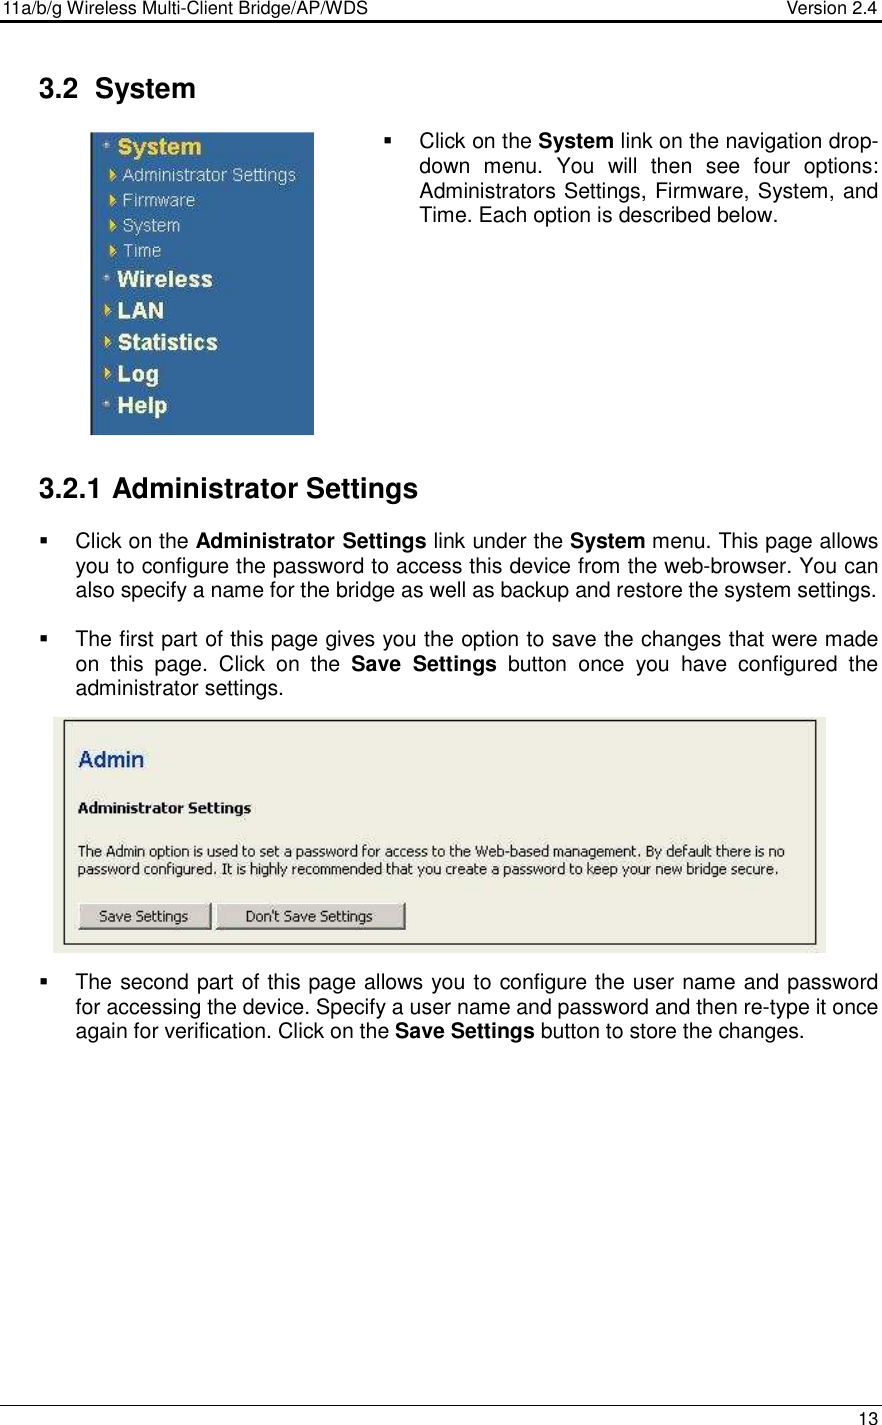 11a/b/g Wireless Multi-Client Bridge/AP/WDS                                  Version 2.4    13   3.2  System   Click on the System link on the navigation drop-down  menu.  You  will  then  see  four  options: Administrators Settings, Firmware, System, and Time. Each option is described below.            3.2.1 Administrator Settings   Click on the Administrator Settings link under the System menu. This page allows you to configure the password to access this device from the web-browser. You can also specify a name for the bridge as well as backup and restore the system settings.    The first part of this page gives you the option to save the changes that were made on  this  page.  Click  on  the  Save  Settings  button  once  you  have  configured  the administrator settings.                The second part of this page allows you to configure the user name and password for accessing the device. Specify a user name and password and then re-type it once again for verification. Click on the Save Settings button to store the changes.                